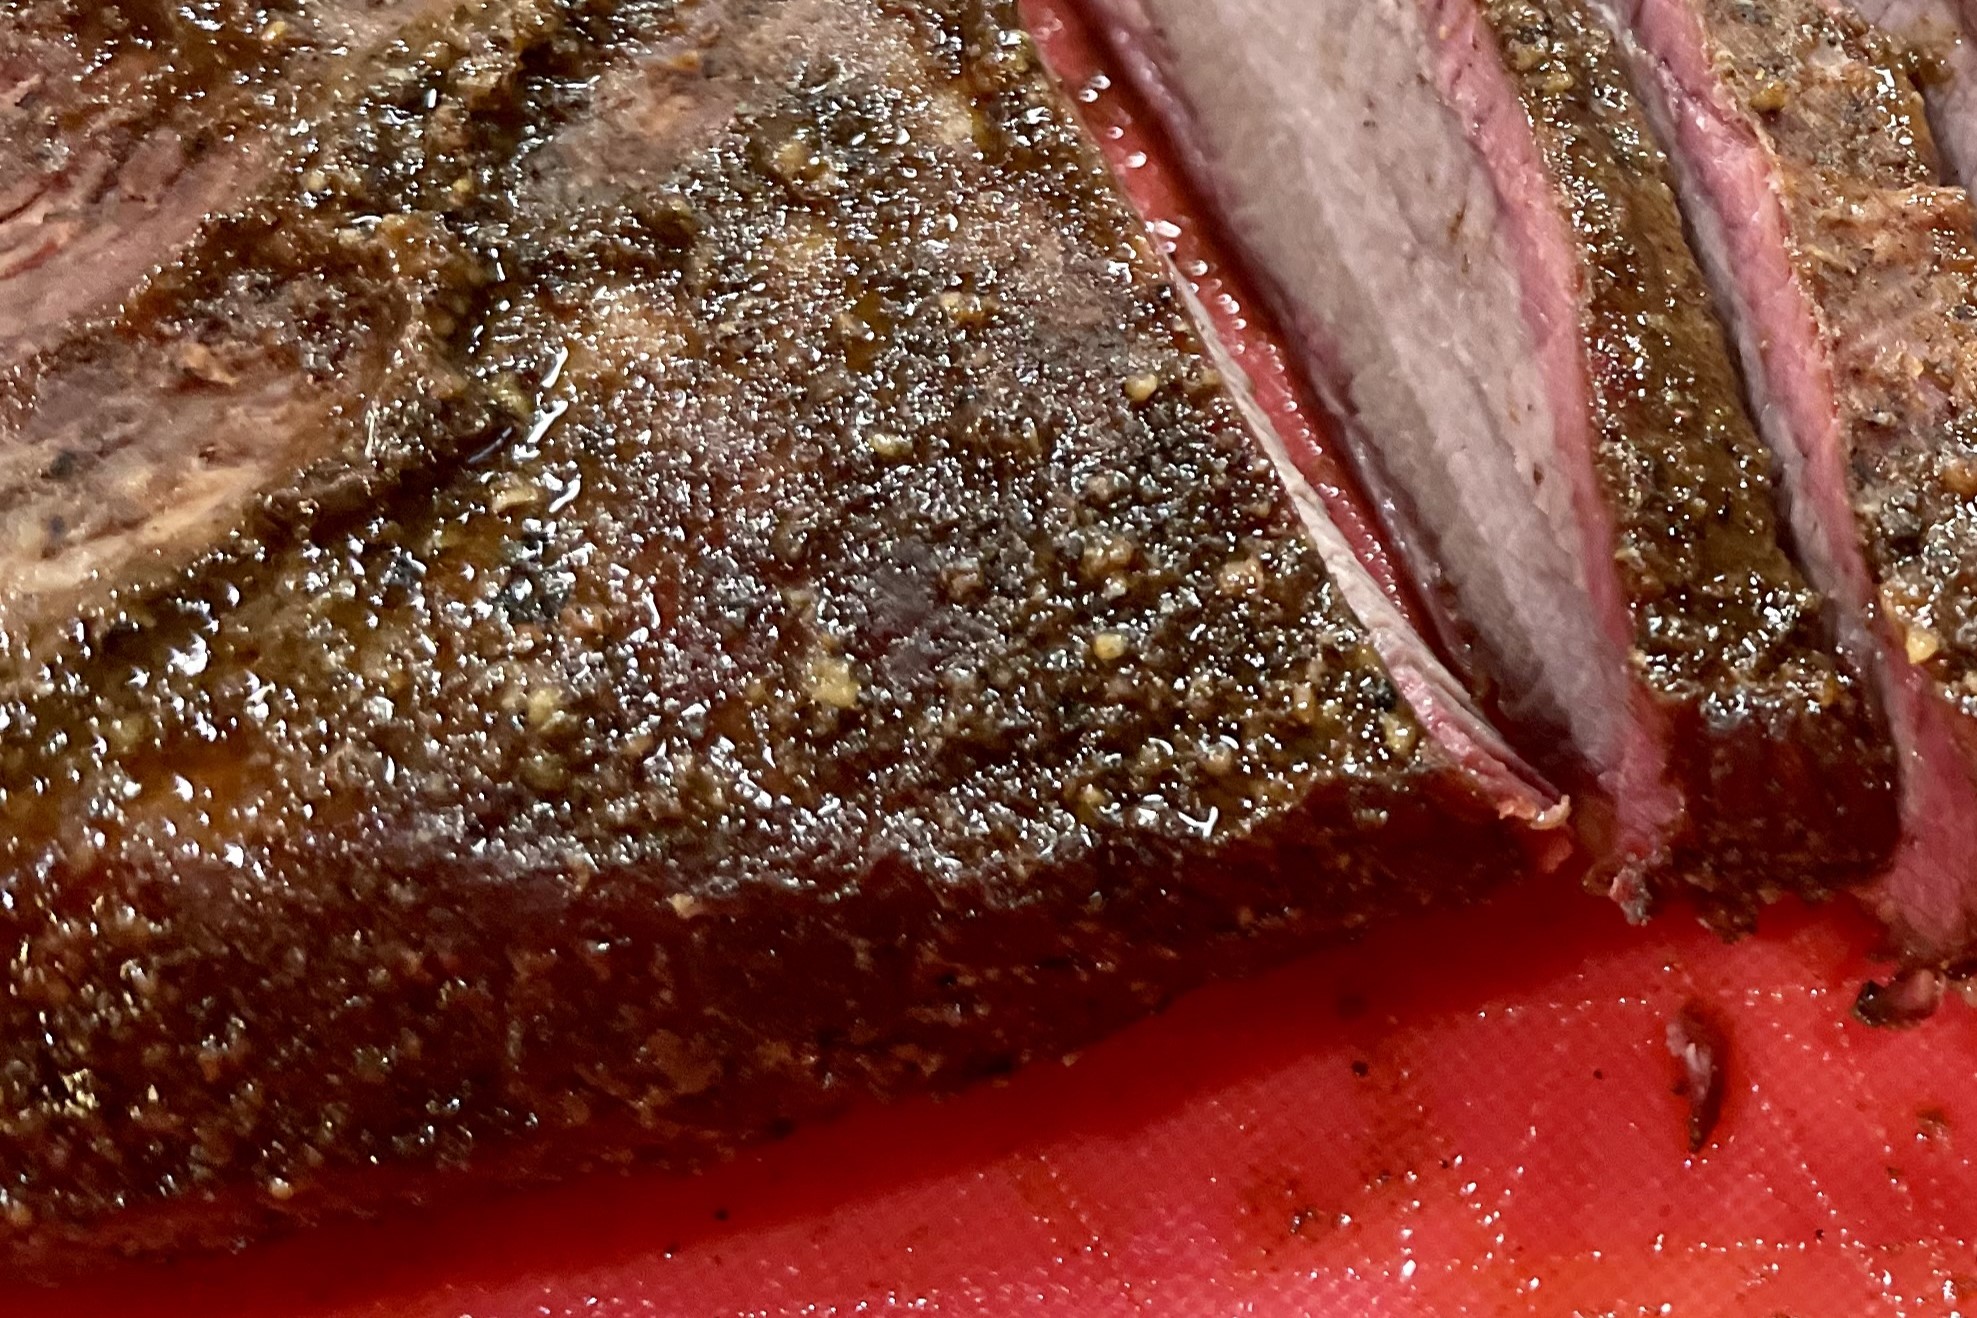 How to Remove Salt from Smoked Meat